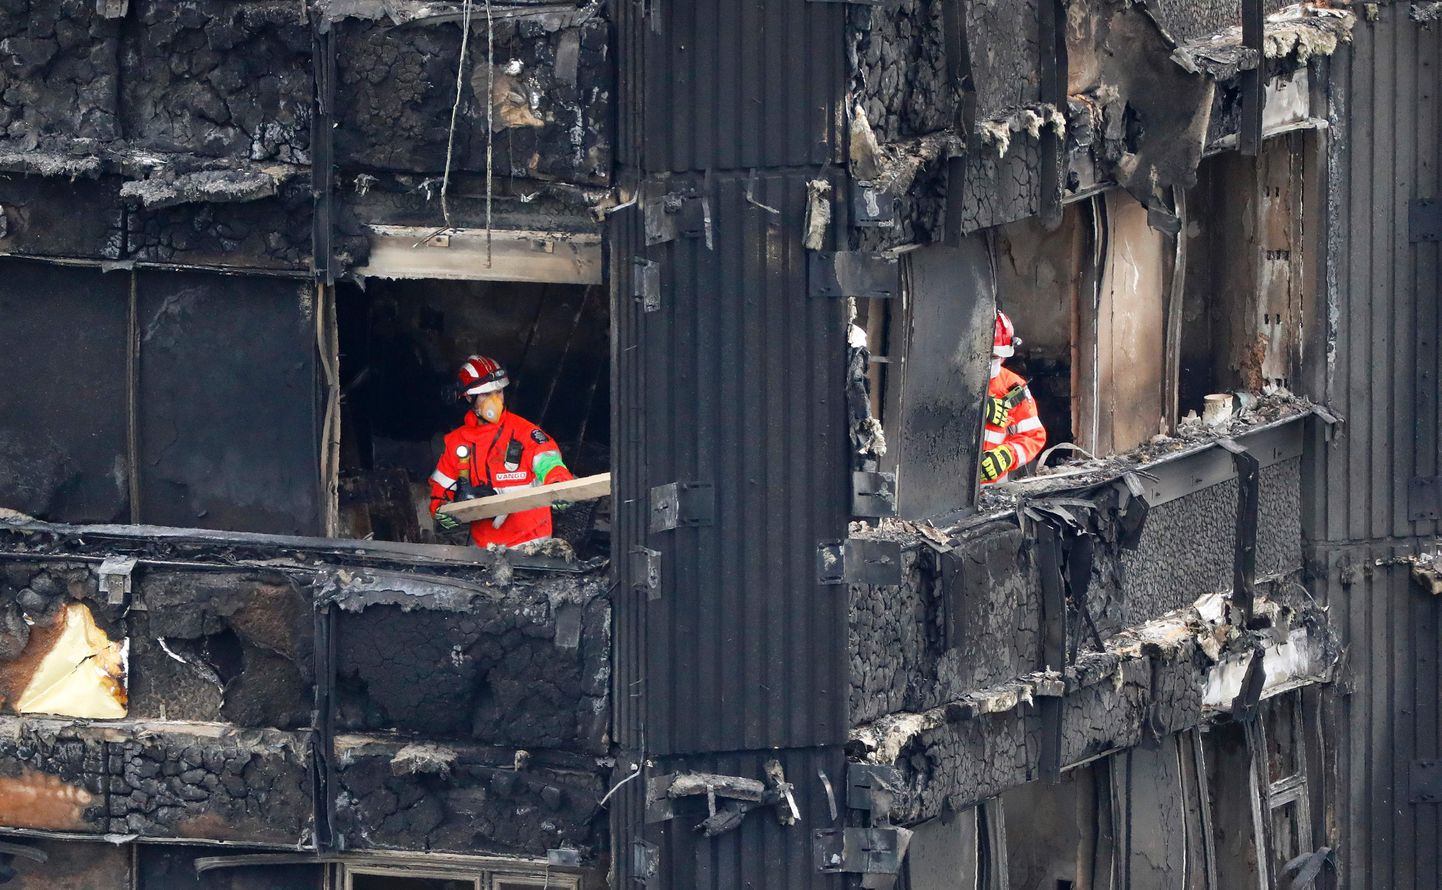 TOPSHOT - Members of the emergency services work on the middle floors of the charred remnains of the Grenfell Tower block in Kensington, west London, on June 17, 2017, follwing the June 14 fire at the residential building.
Angry London residents heckled Prime Minister Theresa May and stormed local authority headquarters Friday as they demanded justice for the victims of the June 14 Kensington tower block fire that left 30 people dead, with dozens more unaccounted for. / AFP PHOTO / Tolga AKMEN